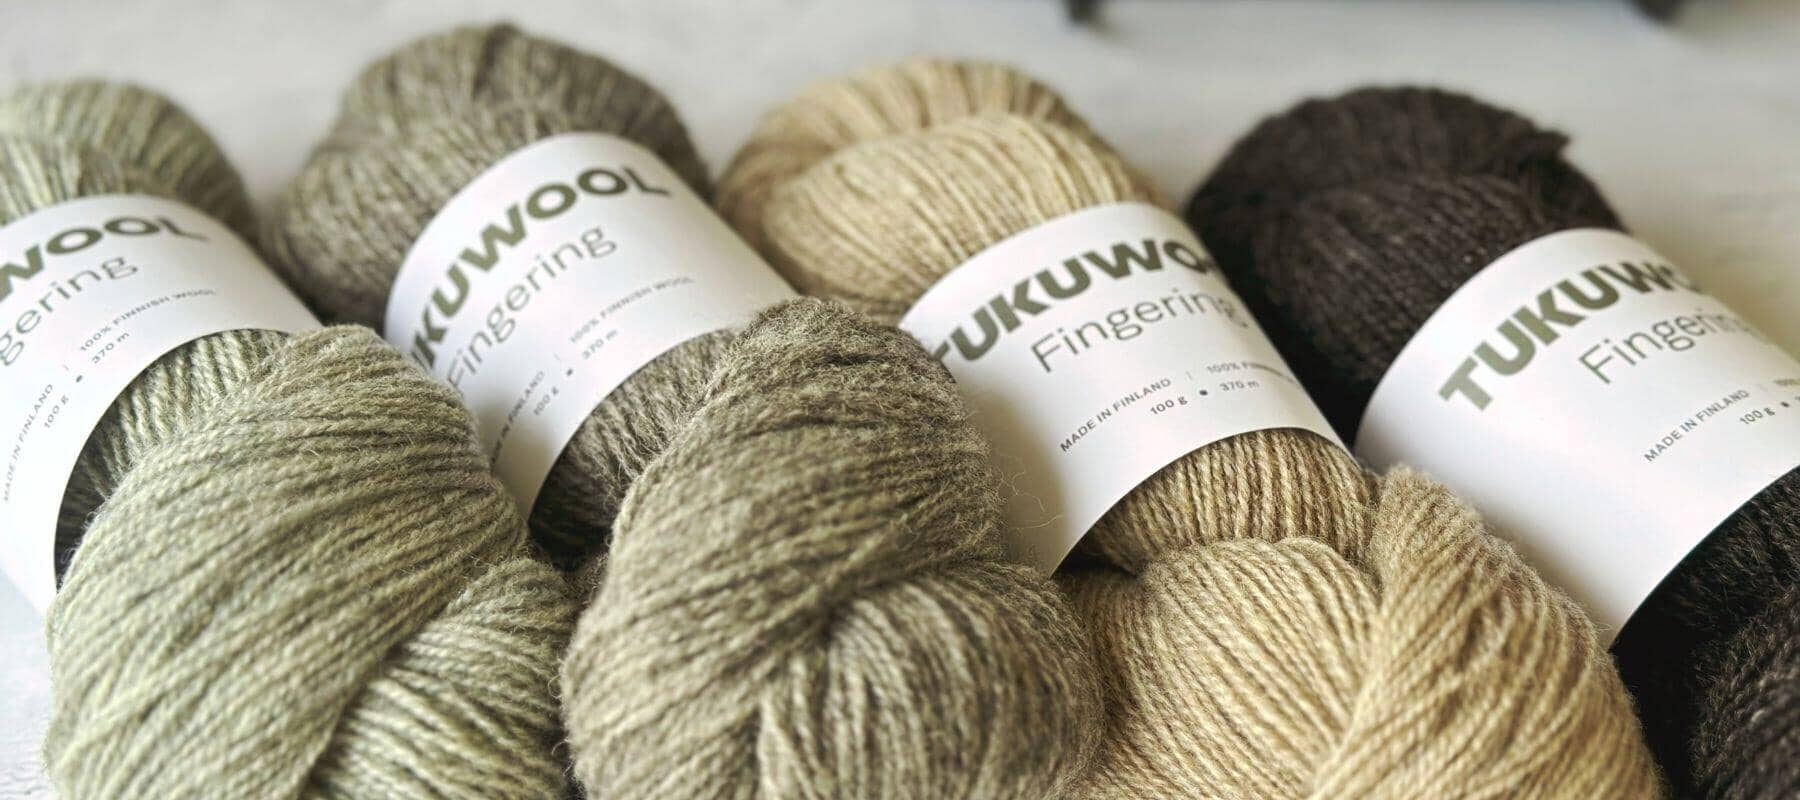 Tukuwool Fingering is back! And it's had an update...